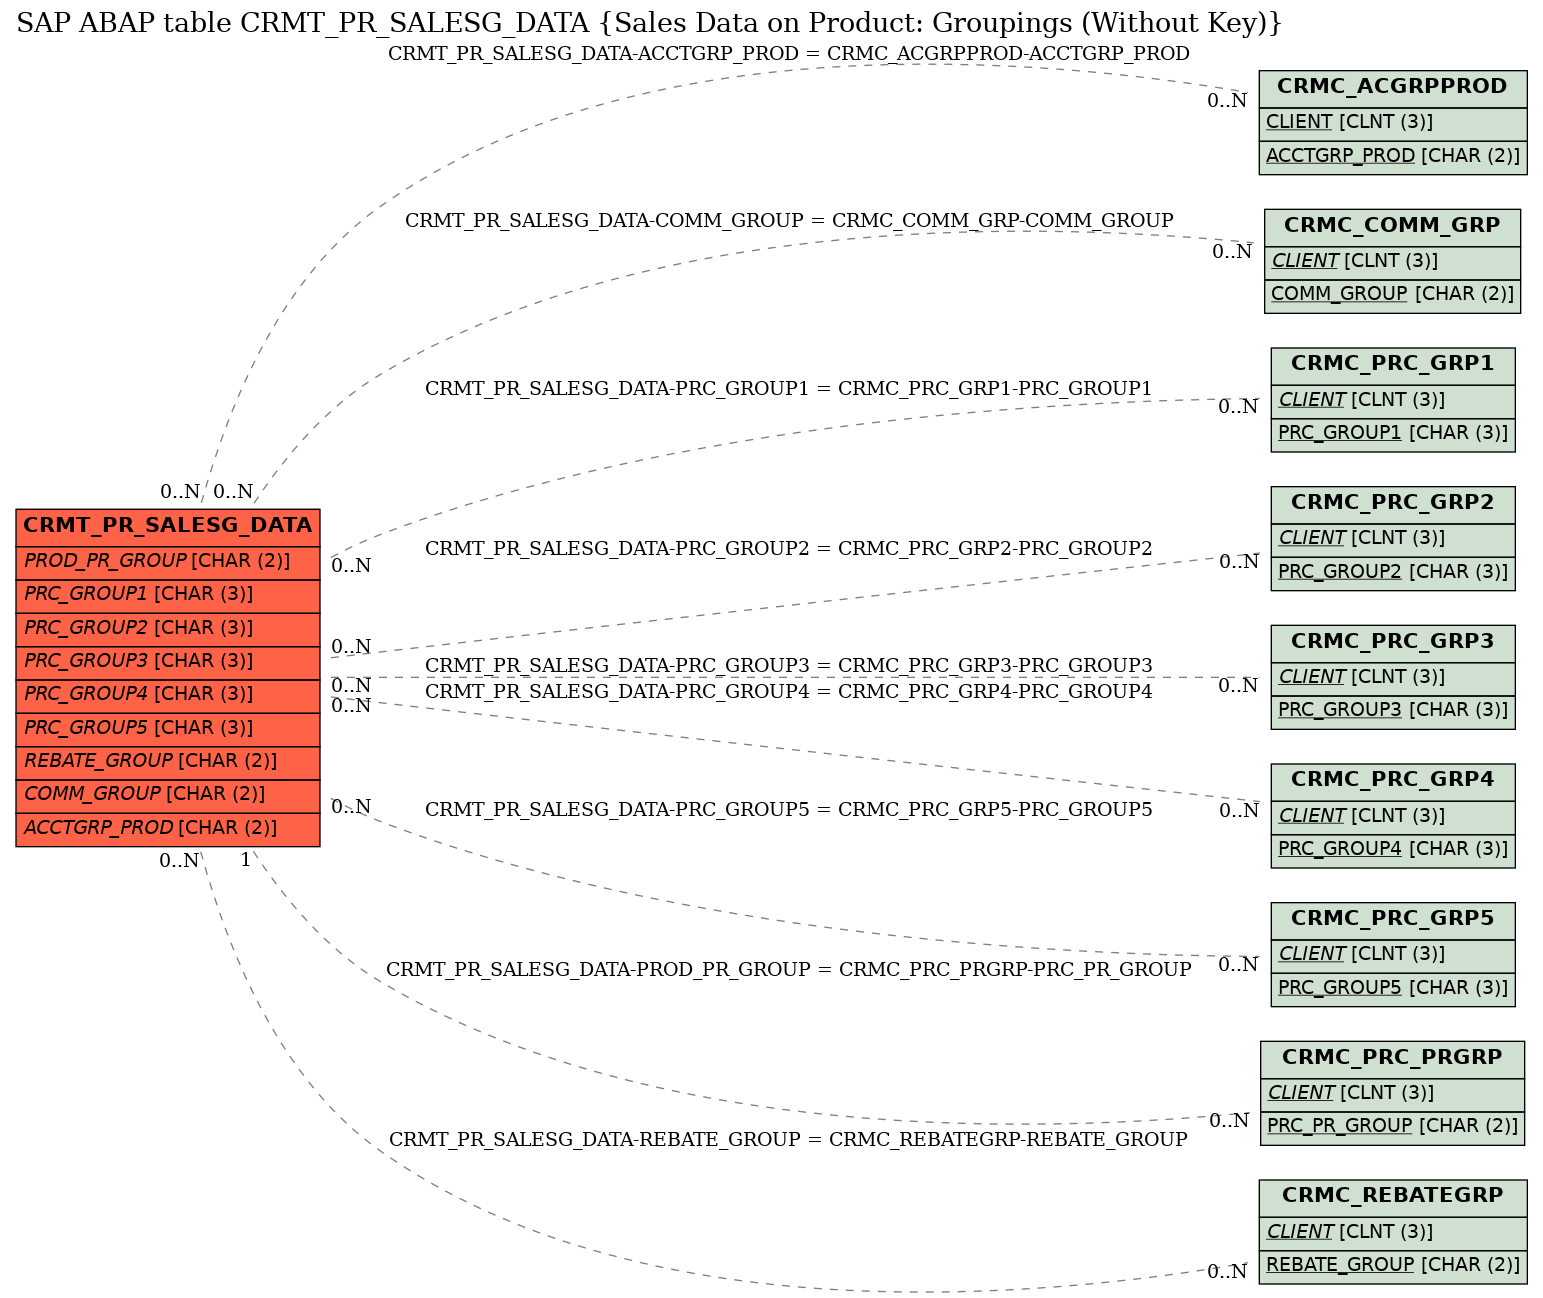 E-R Diagram for table CRMT_PR_SALESG_DATA (Sales Data on Product: Groupings (Without Key))